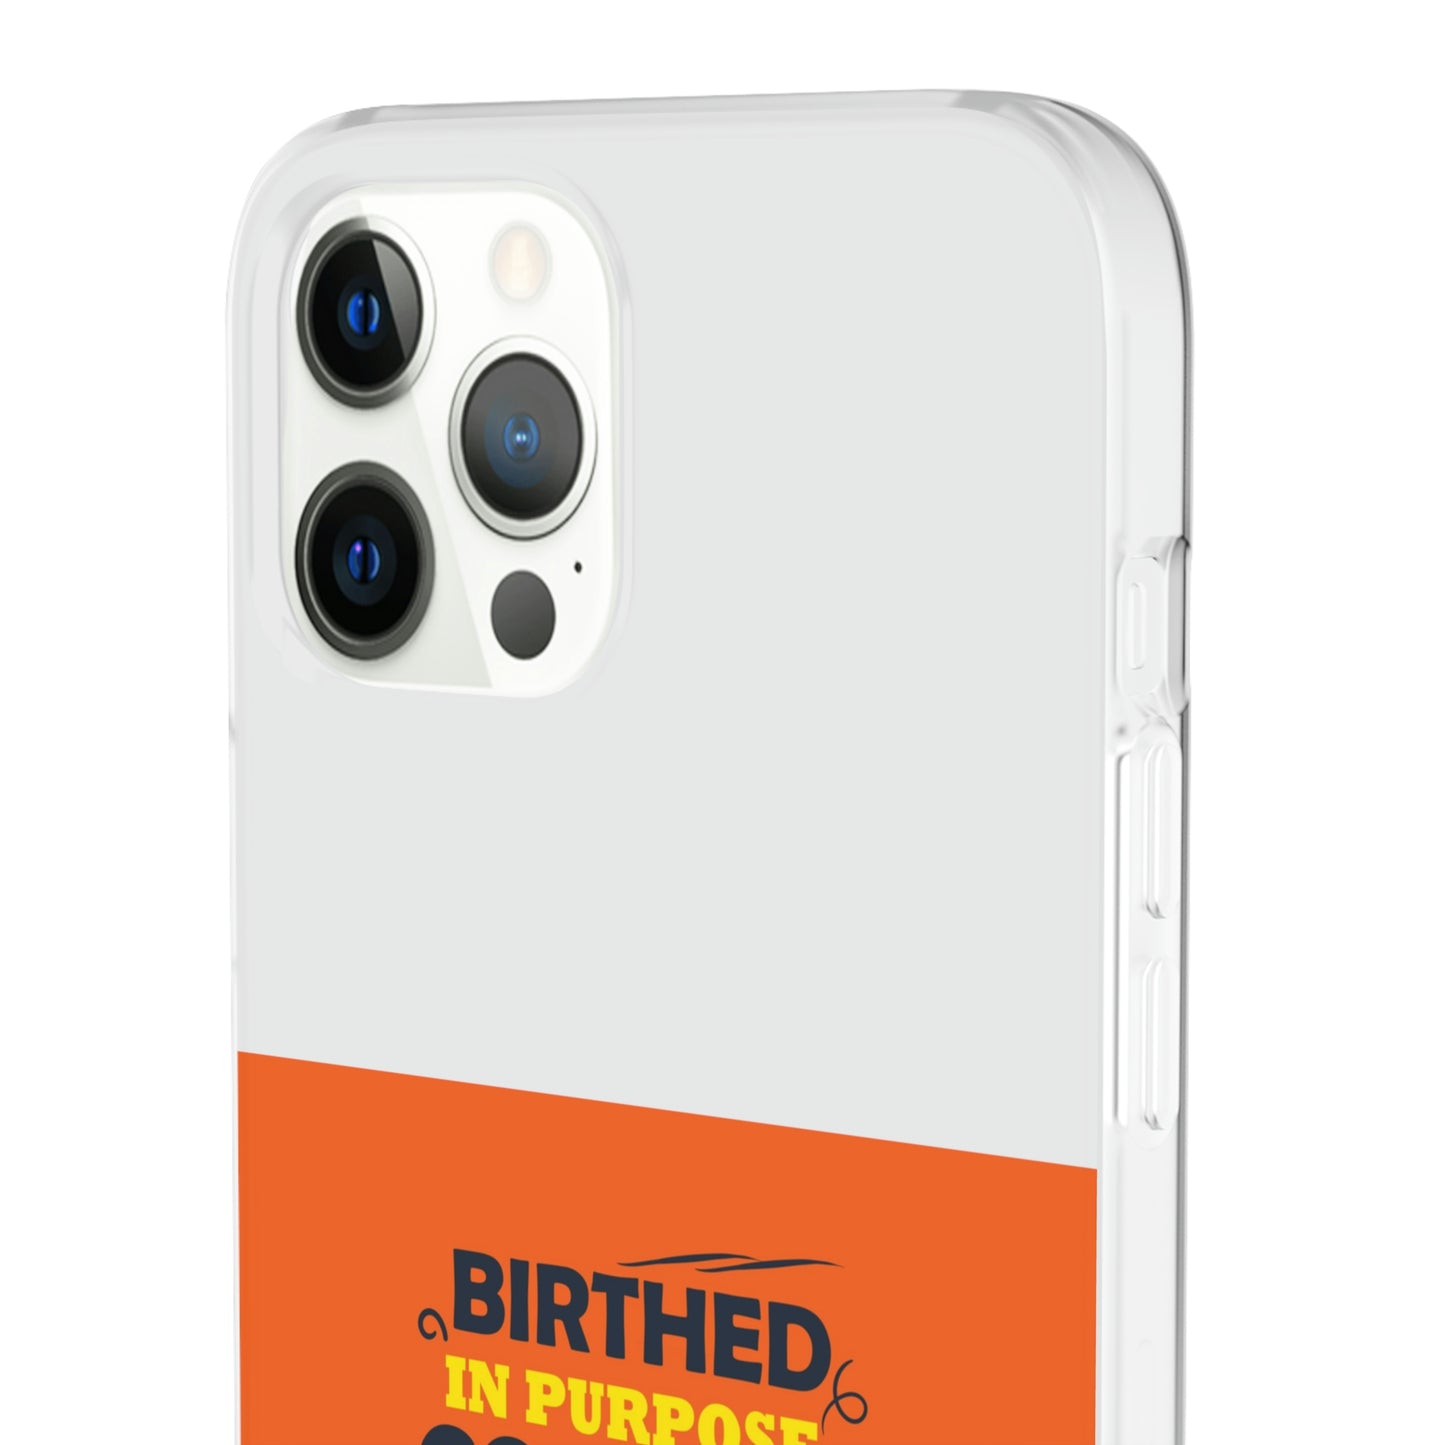 Birthed In Purpose, Covered in Favor, Branded With God's Greatness Flexi Phone Case